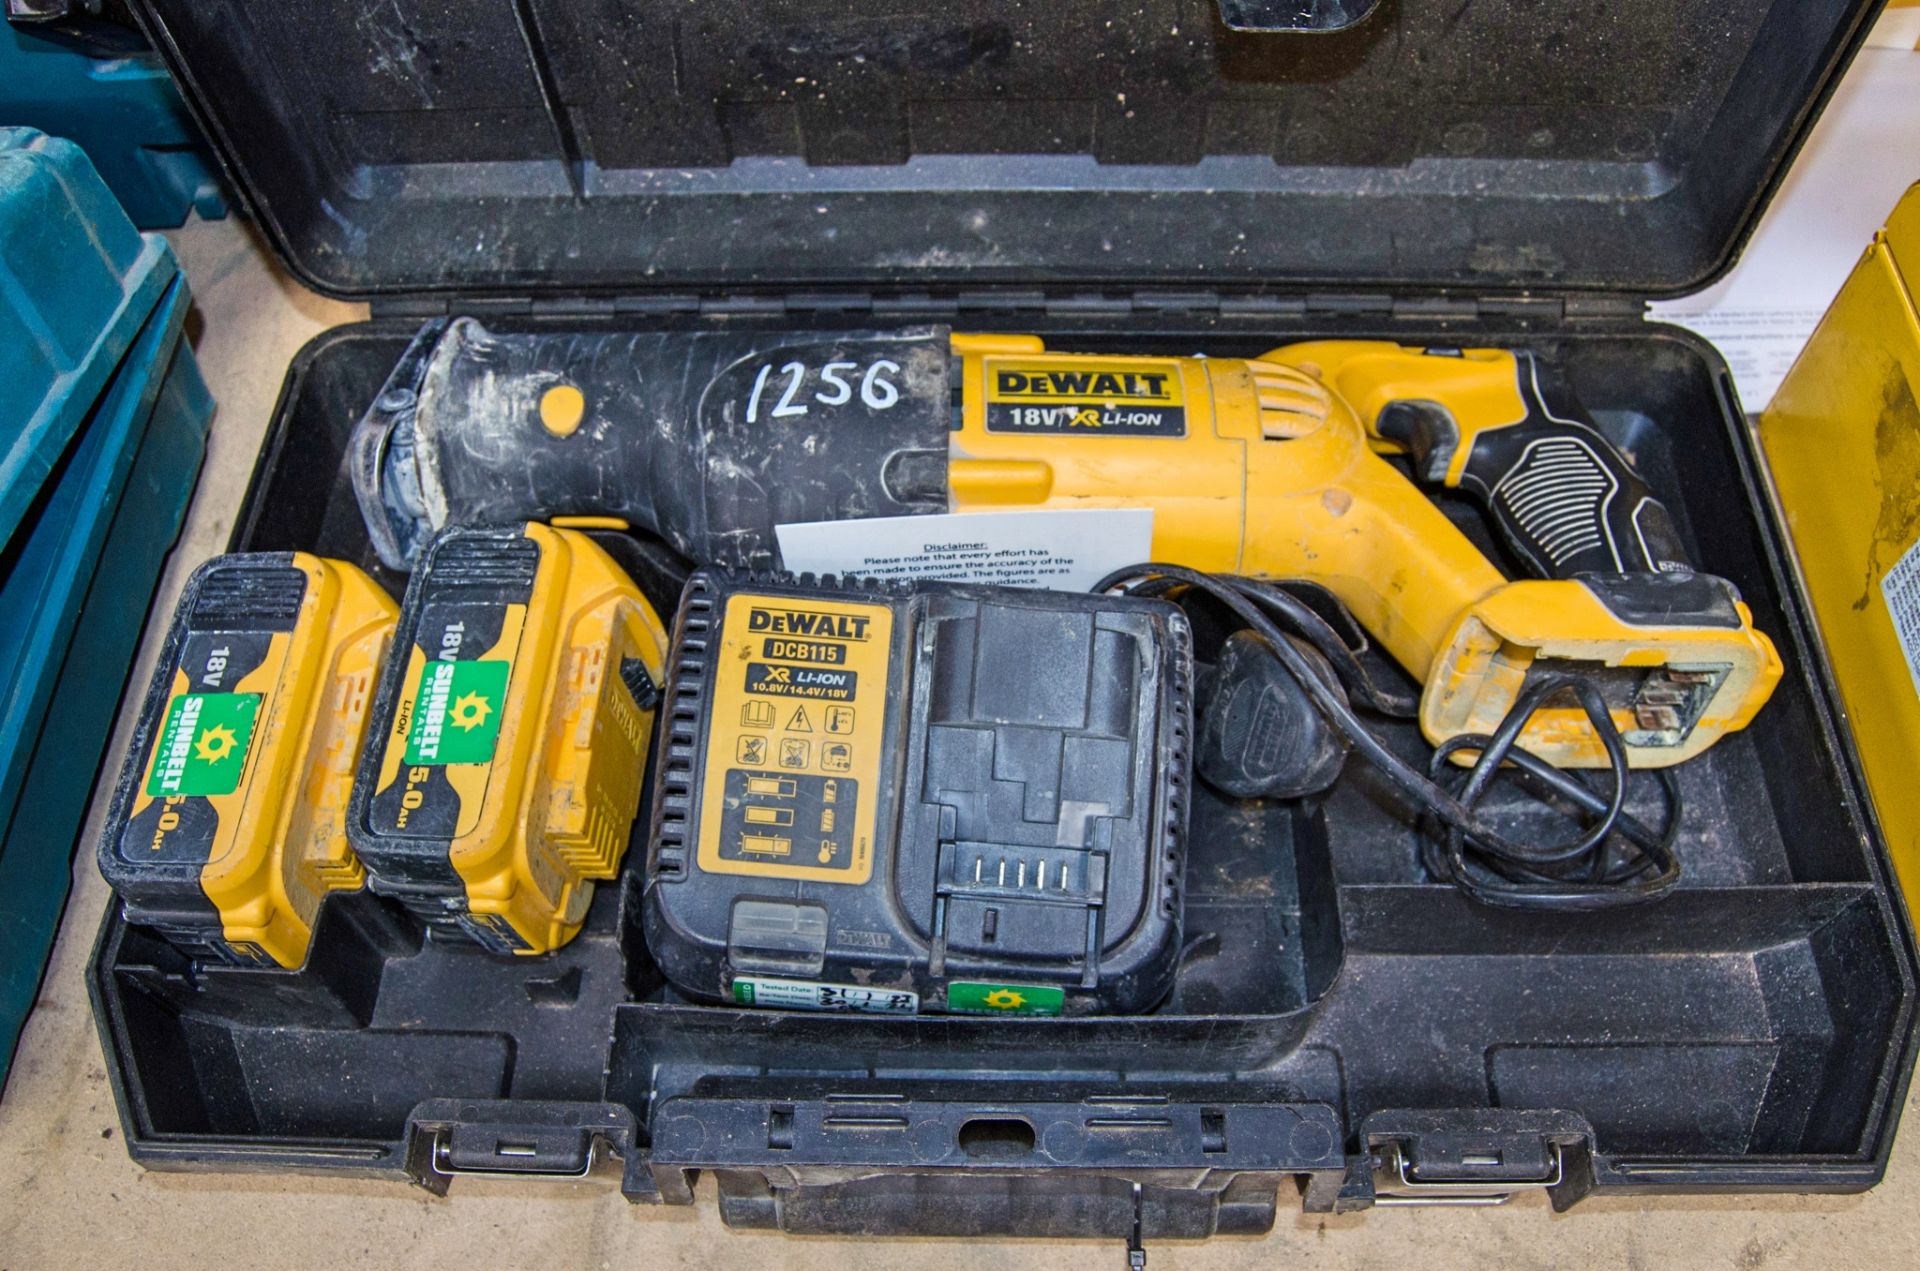 Dewalt DCS380 18v cordless reciprocating saw c/w 2 batteries, charger and carry case A770137